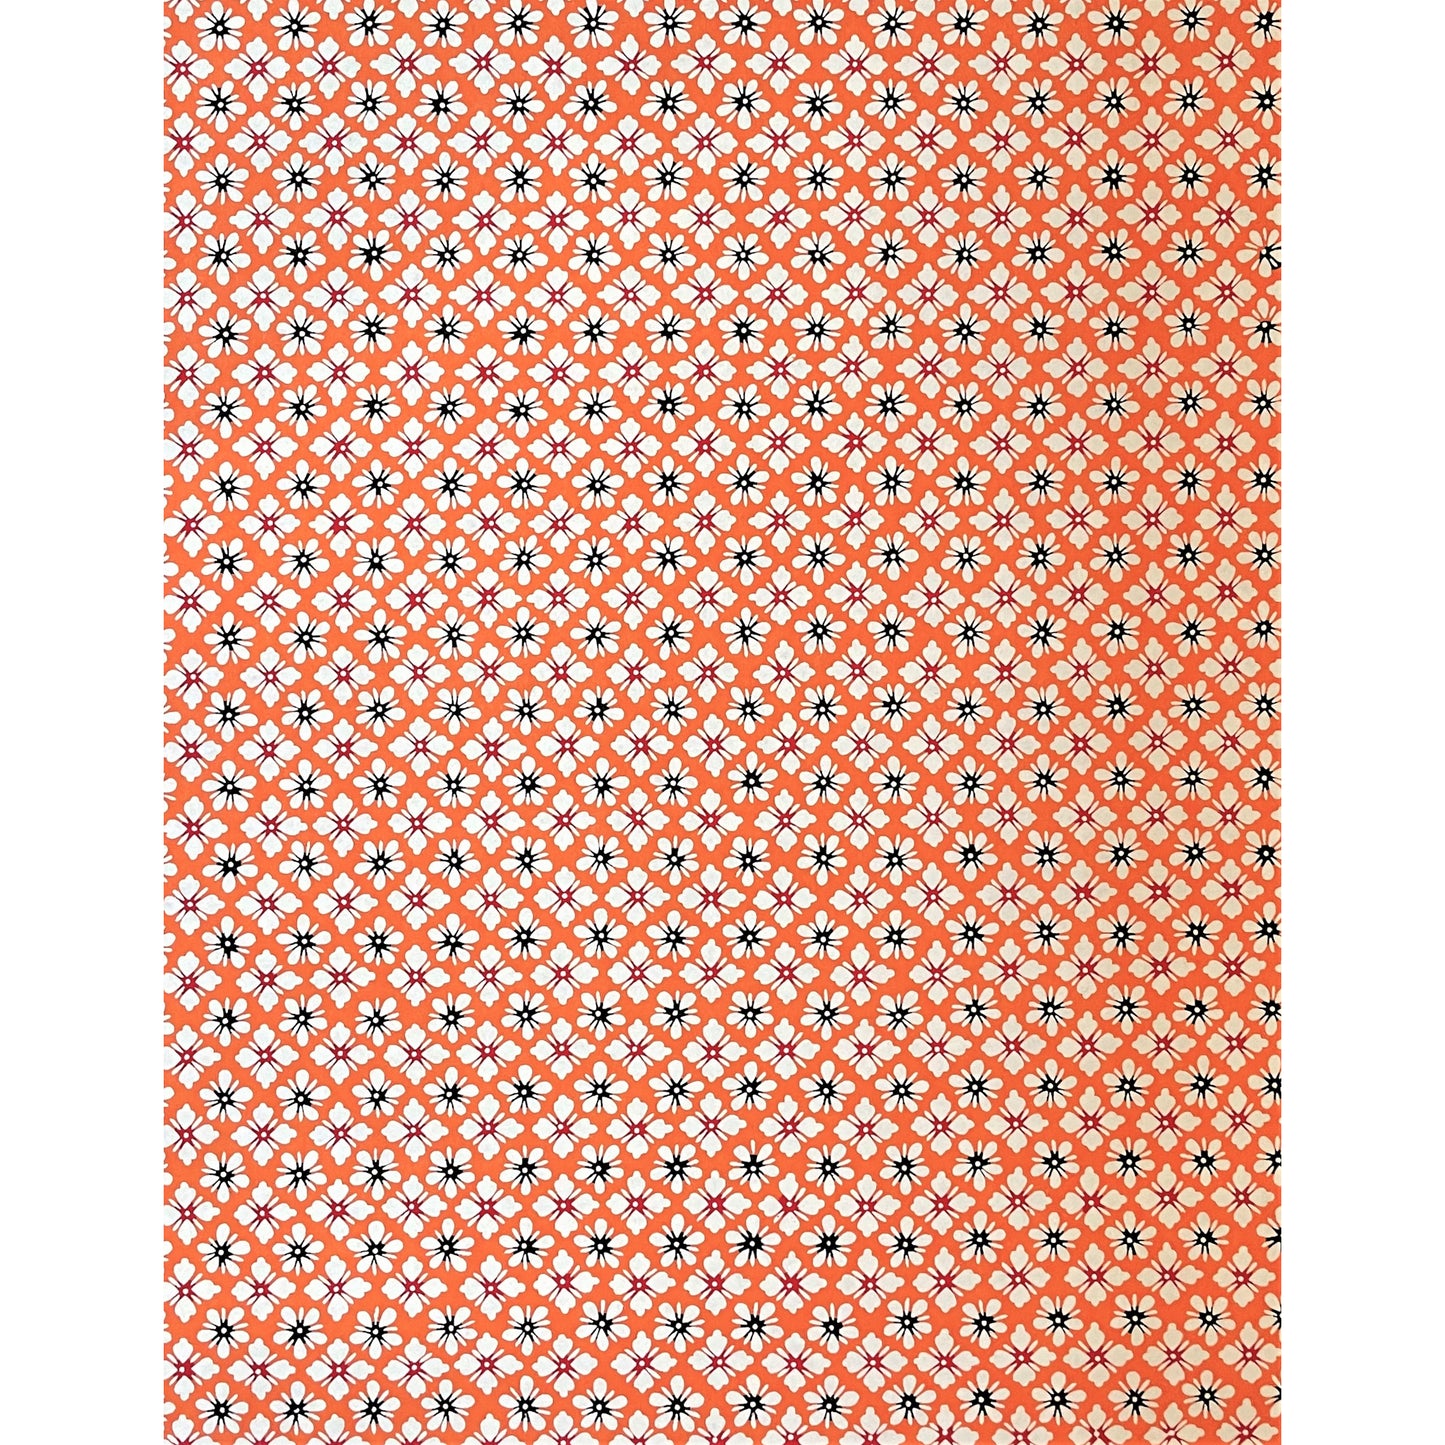 japanese stencil-dyed handmade paper with small scale floral repeat in orange and cream, full sheet view